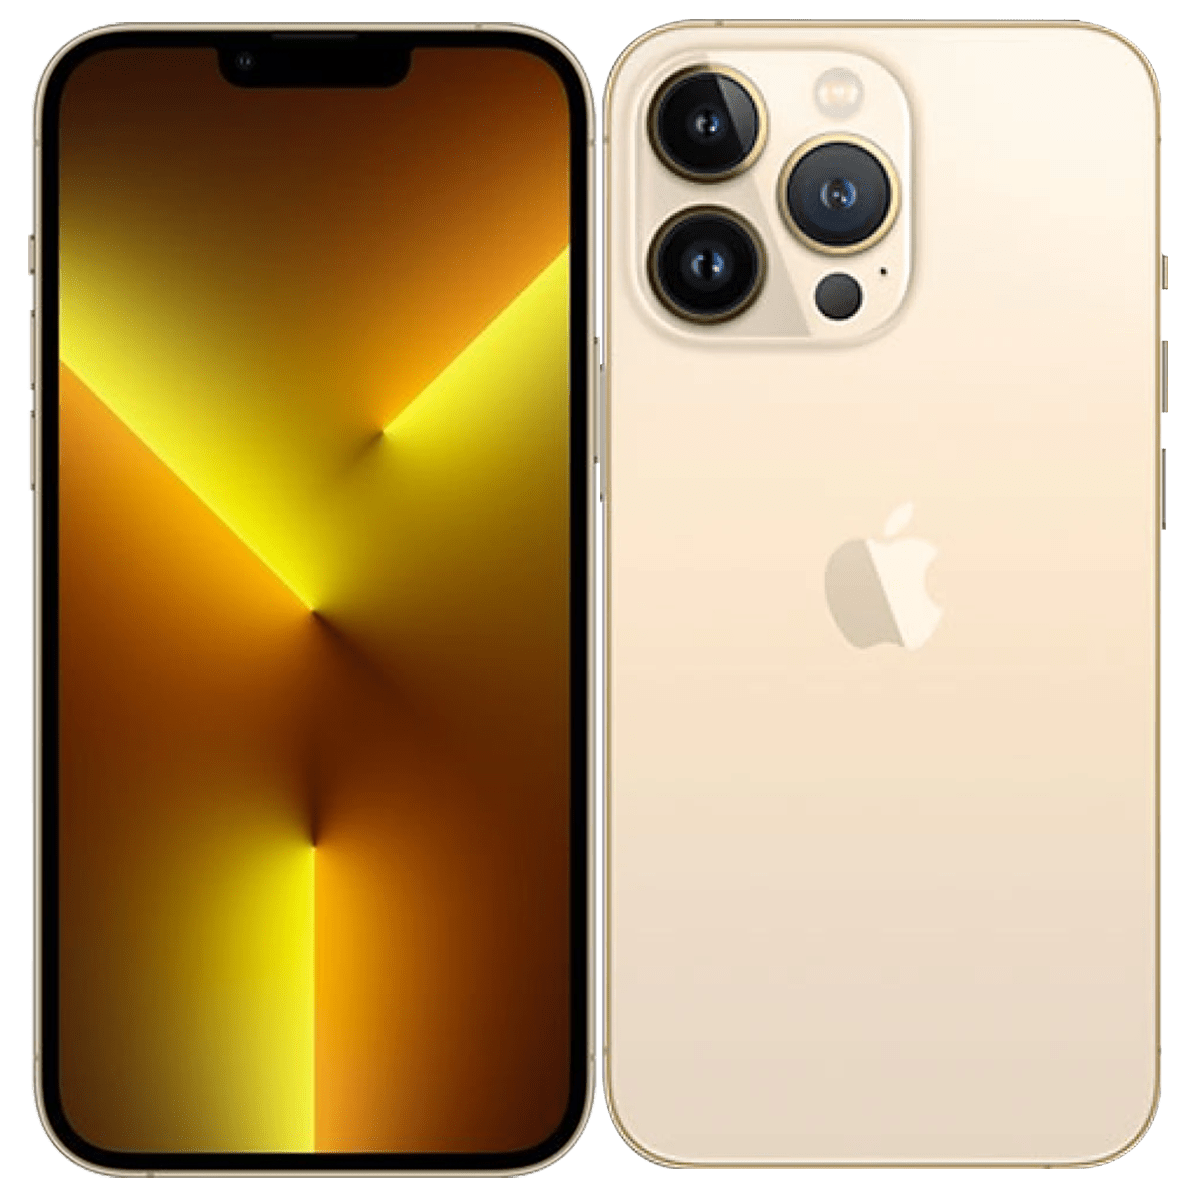 iphone 13 gold png transparent, iphone 13 gold png download, iphone 13 gold png png, iphone 13 gold png frame, iphone 13 gold png background, iphone 13 gold png border, iphone 13 gold png, iphone 13 pro max release date, iphone 13 design, iphone 13 price, iphone 13 camera, iphone 13 png, iphone 13 png transparent